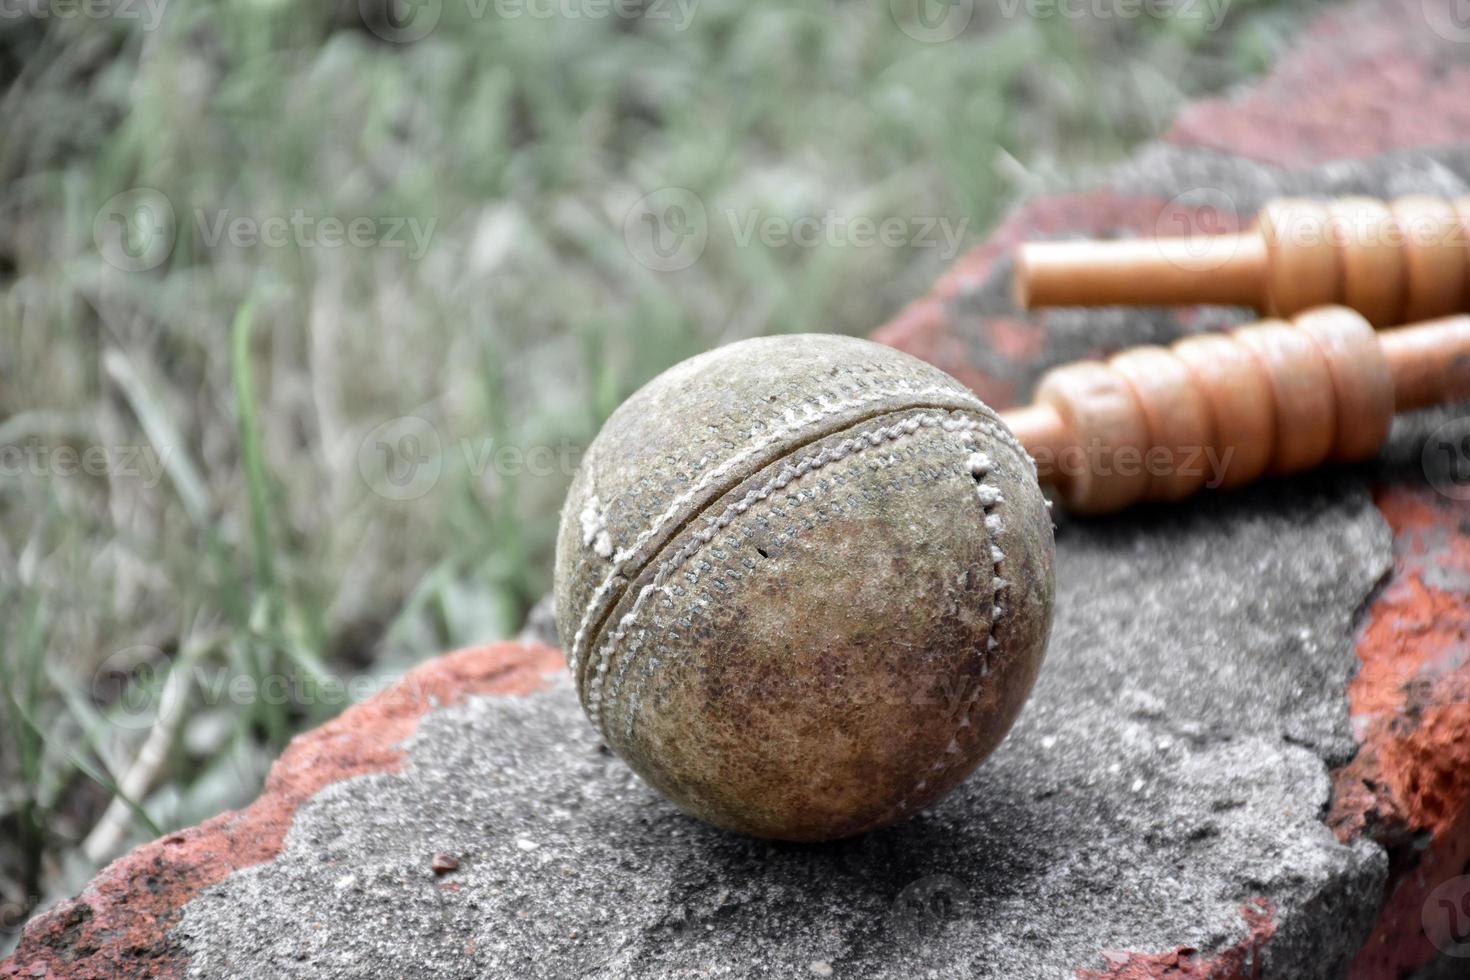 Old training cricket sport equipments on dark floor, leather ball, wickets, helmet and wooden bat, soft and selective focus, traditional cricket sport lovers around the world concept. photo